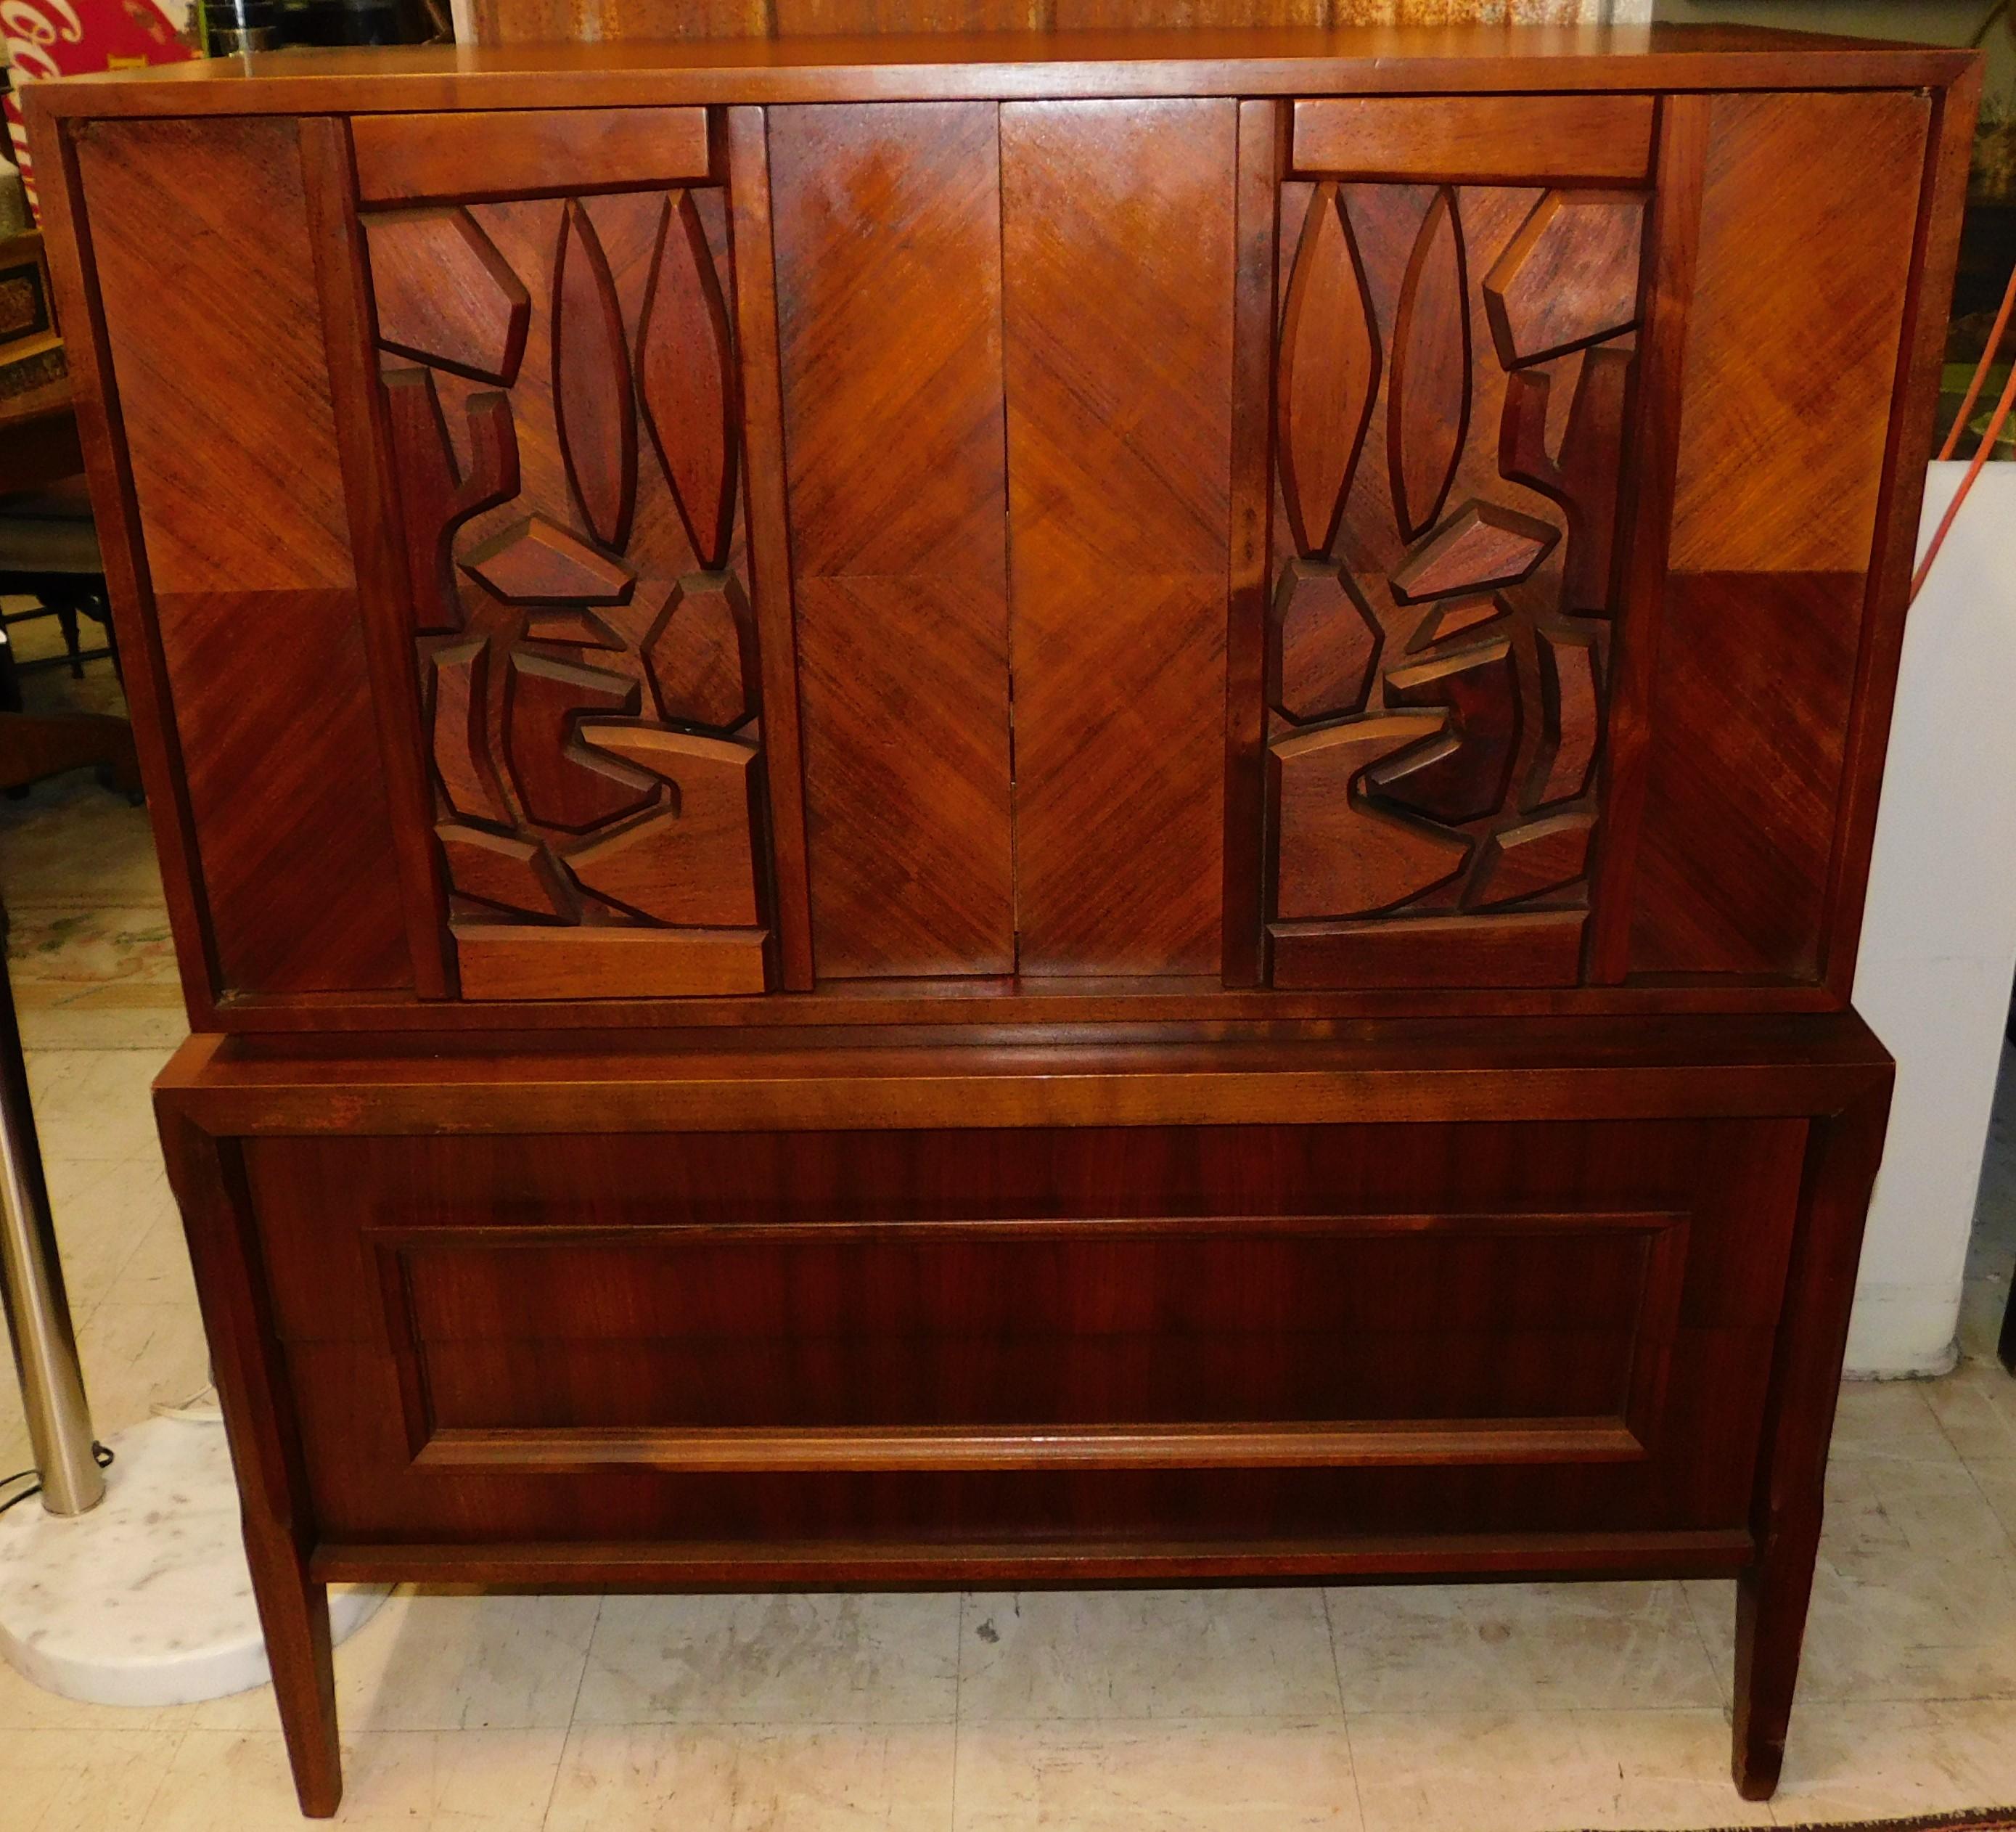 Vintage Cubist style Brutalist Mid-Century Modern walnut gentleman's chest. Item features Brutalist block front, beautiful wood grain, two swing doors, five dovetailed drawers, three upper and two lower. Great style and form, circa mid-20th century,